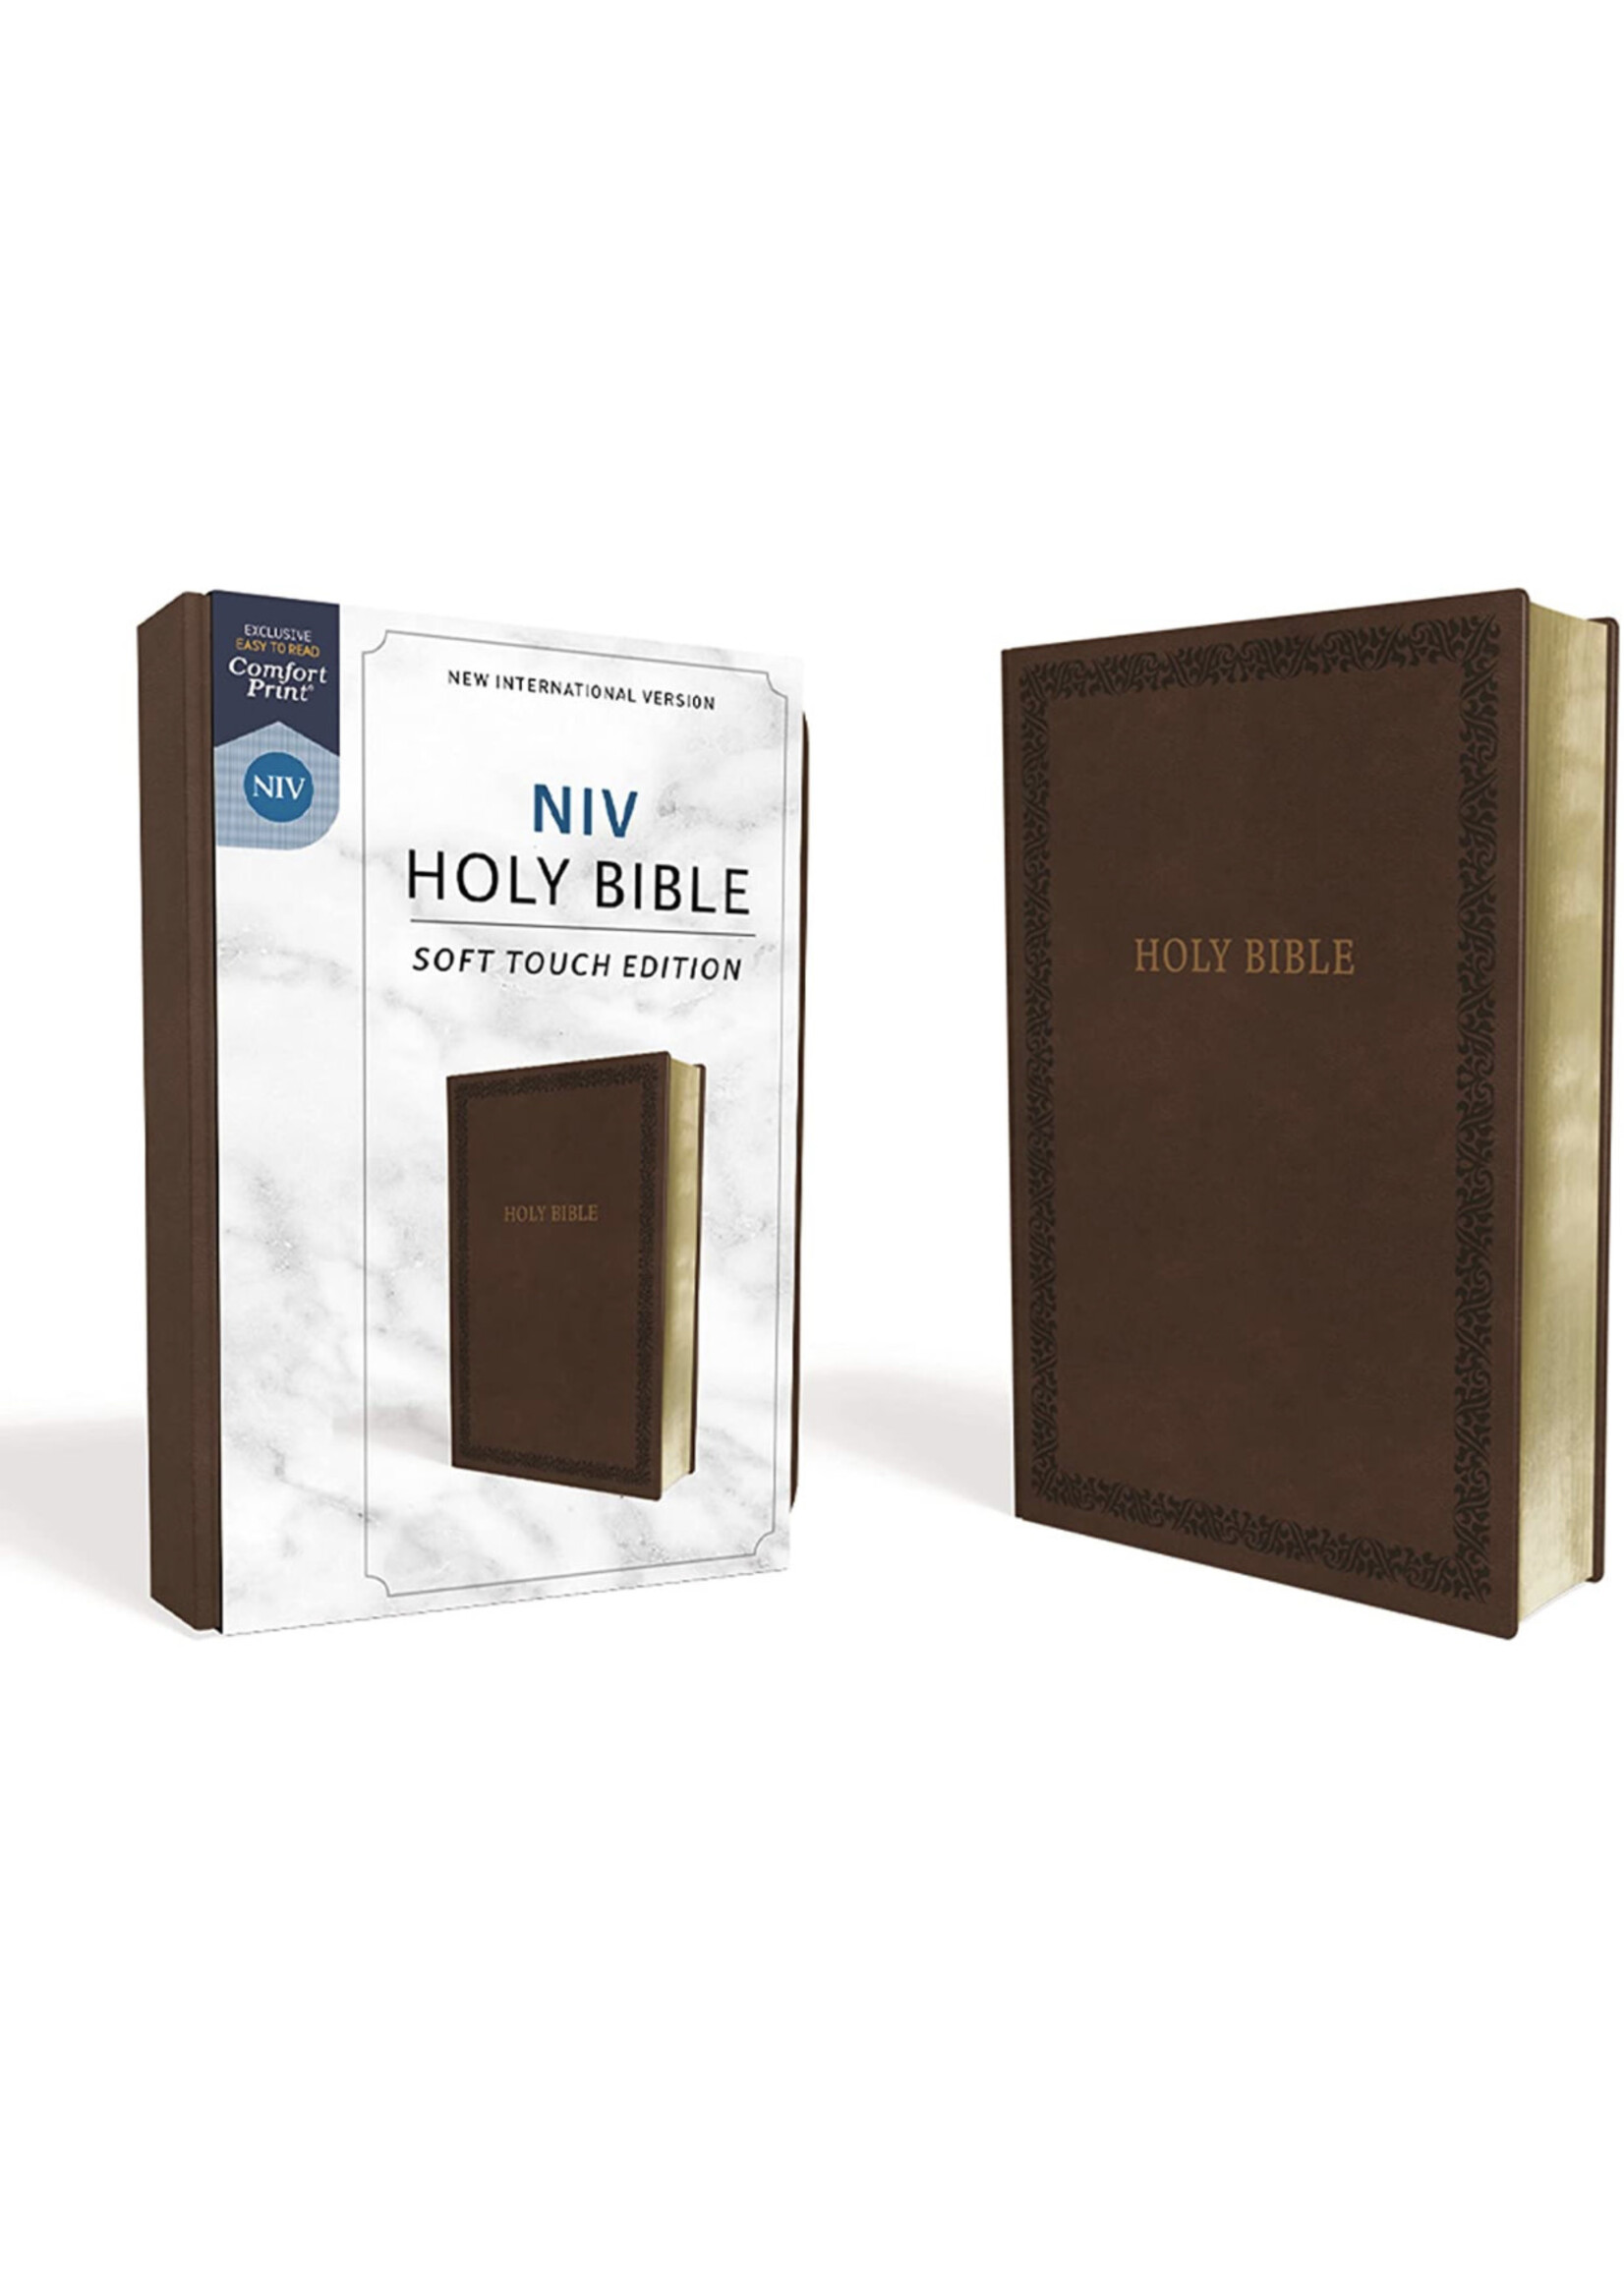 NIV Holy Bible Soft Touch Edition